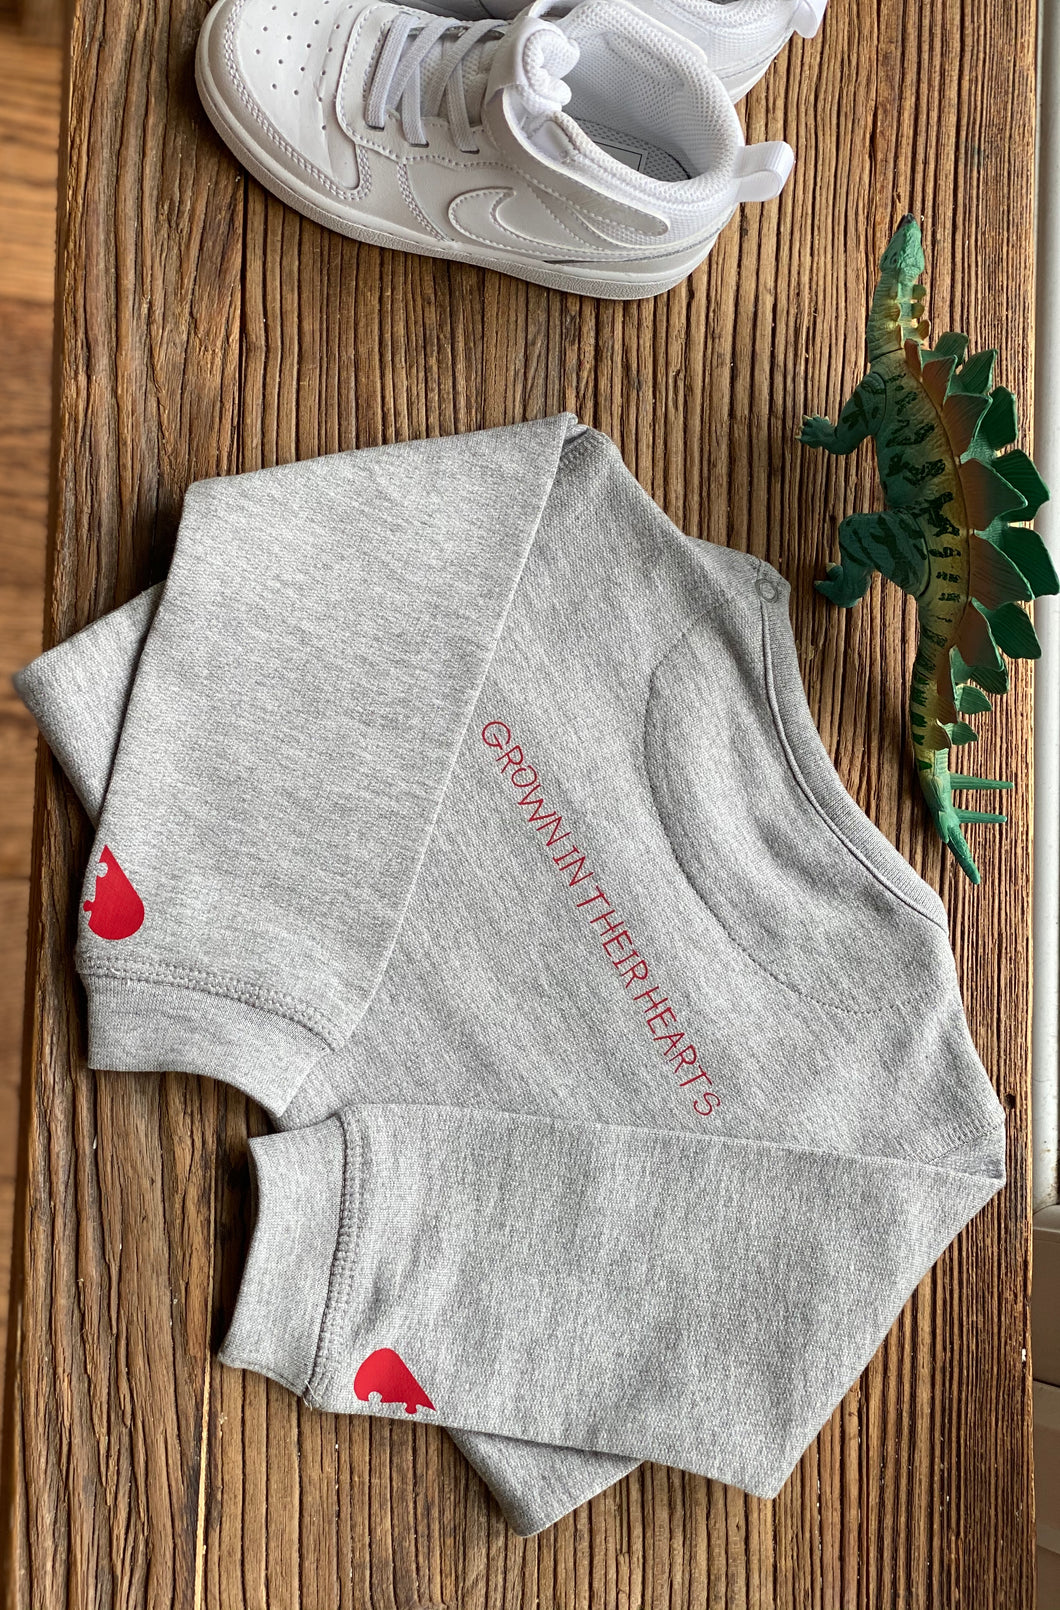 Baby's adoption top - baby & toddler's grown in their hearts sweatshirt